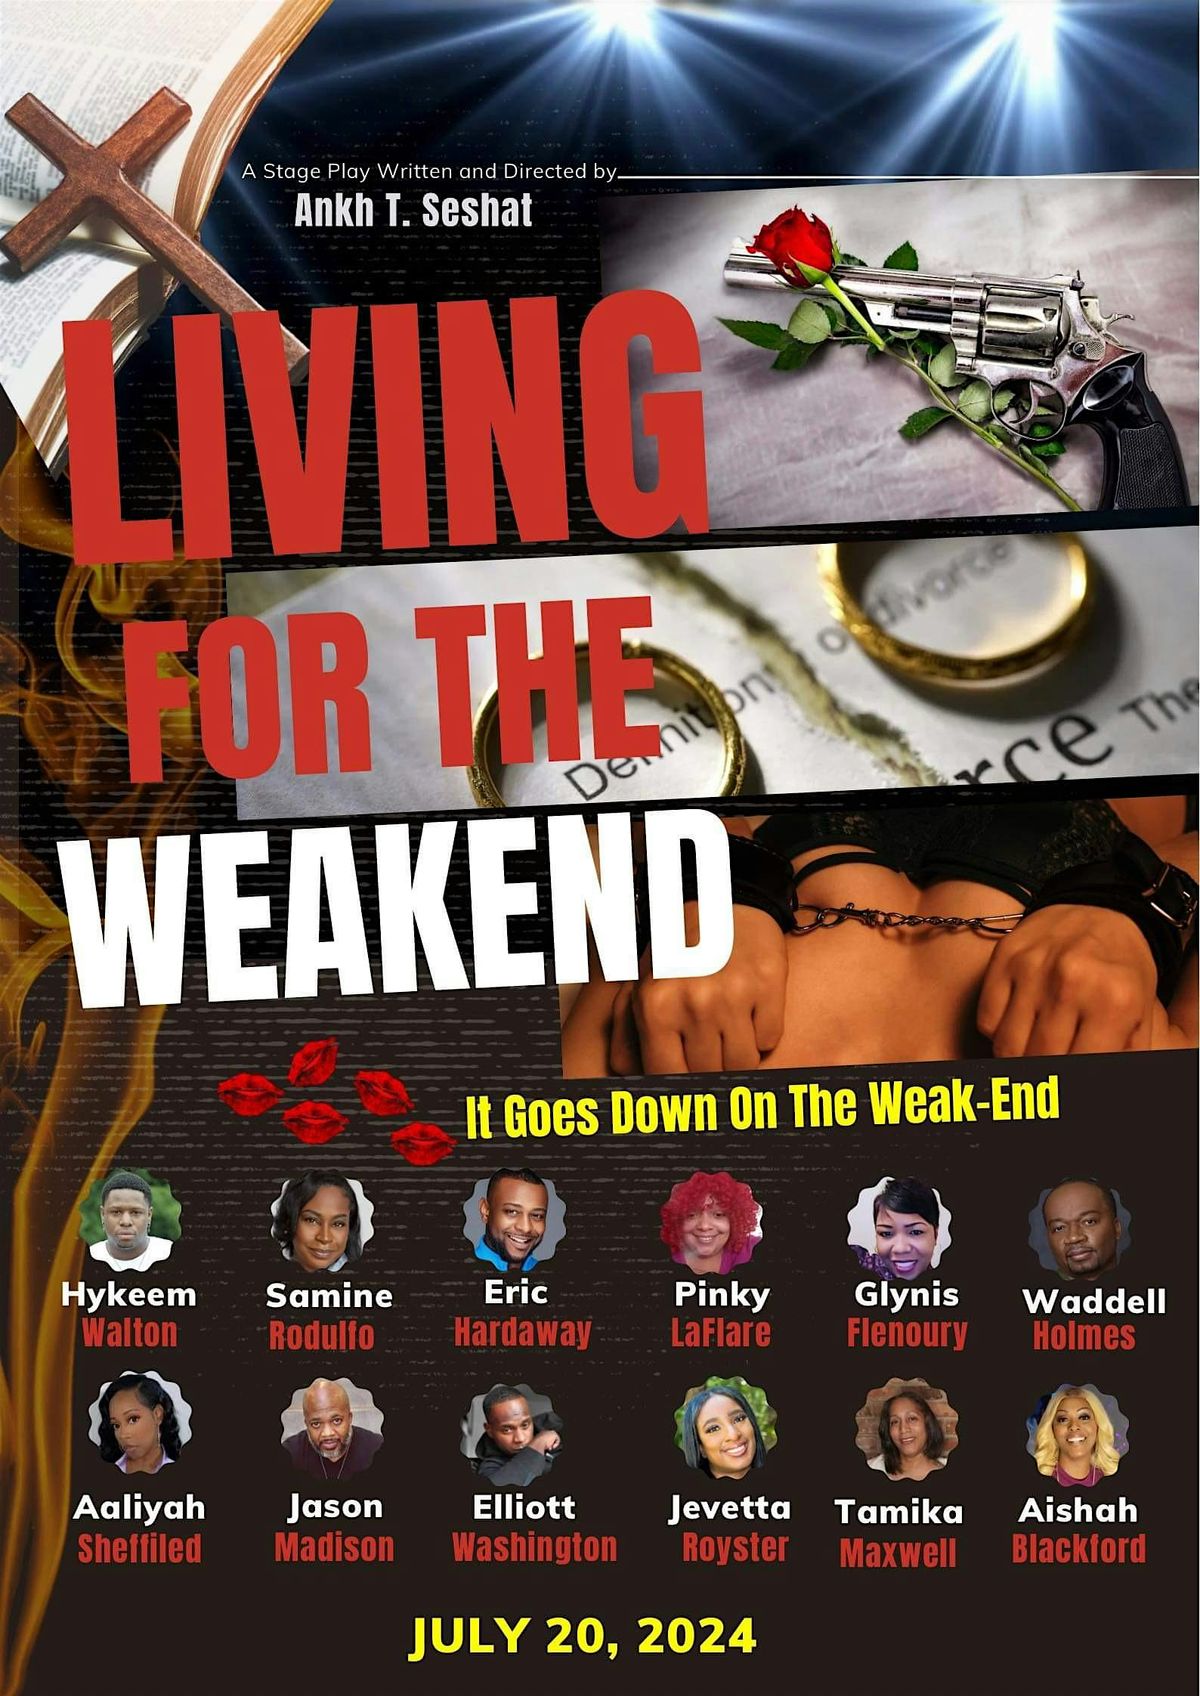 LIVING FOR THE WEAK-END (THE STAGE PLAY)